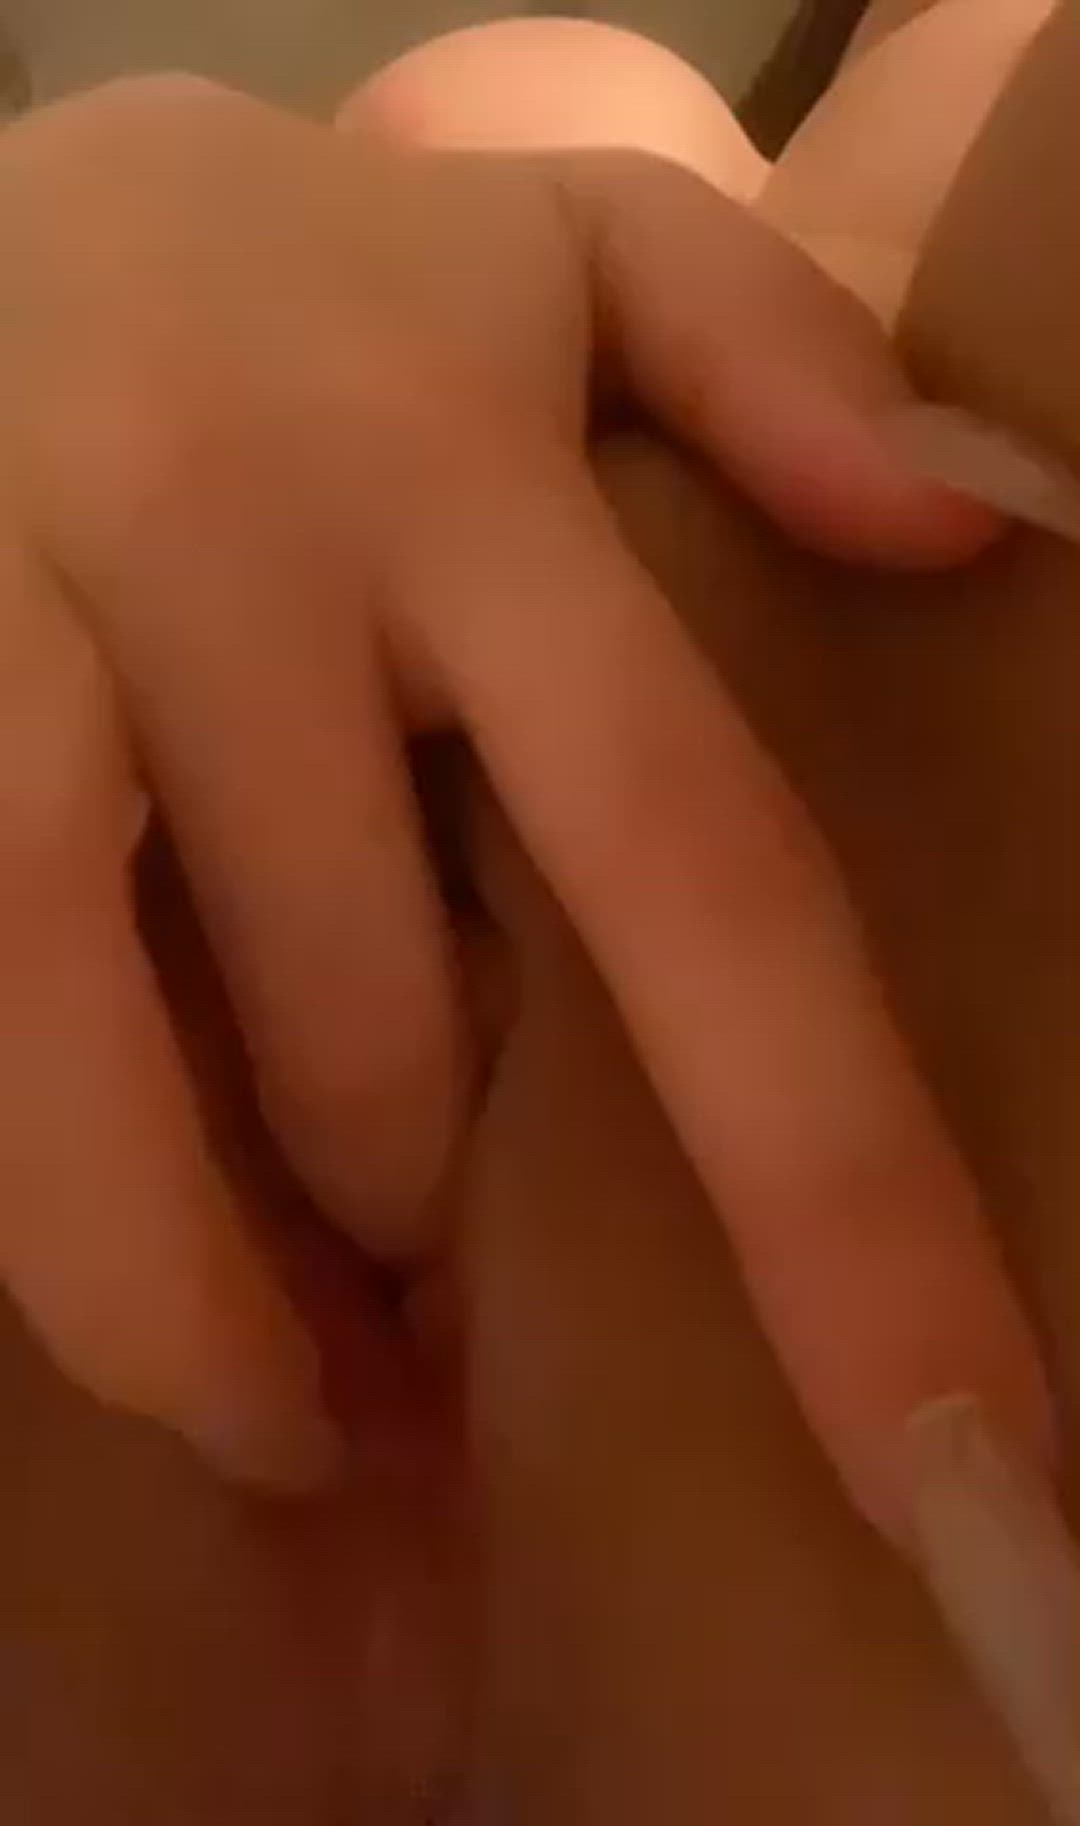 Big Tits porn video with onlyfans model Yourcurvygirl1 <strong>@yourcurvygirl1</strong>